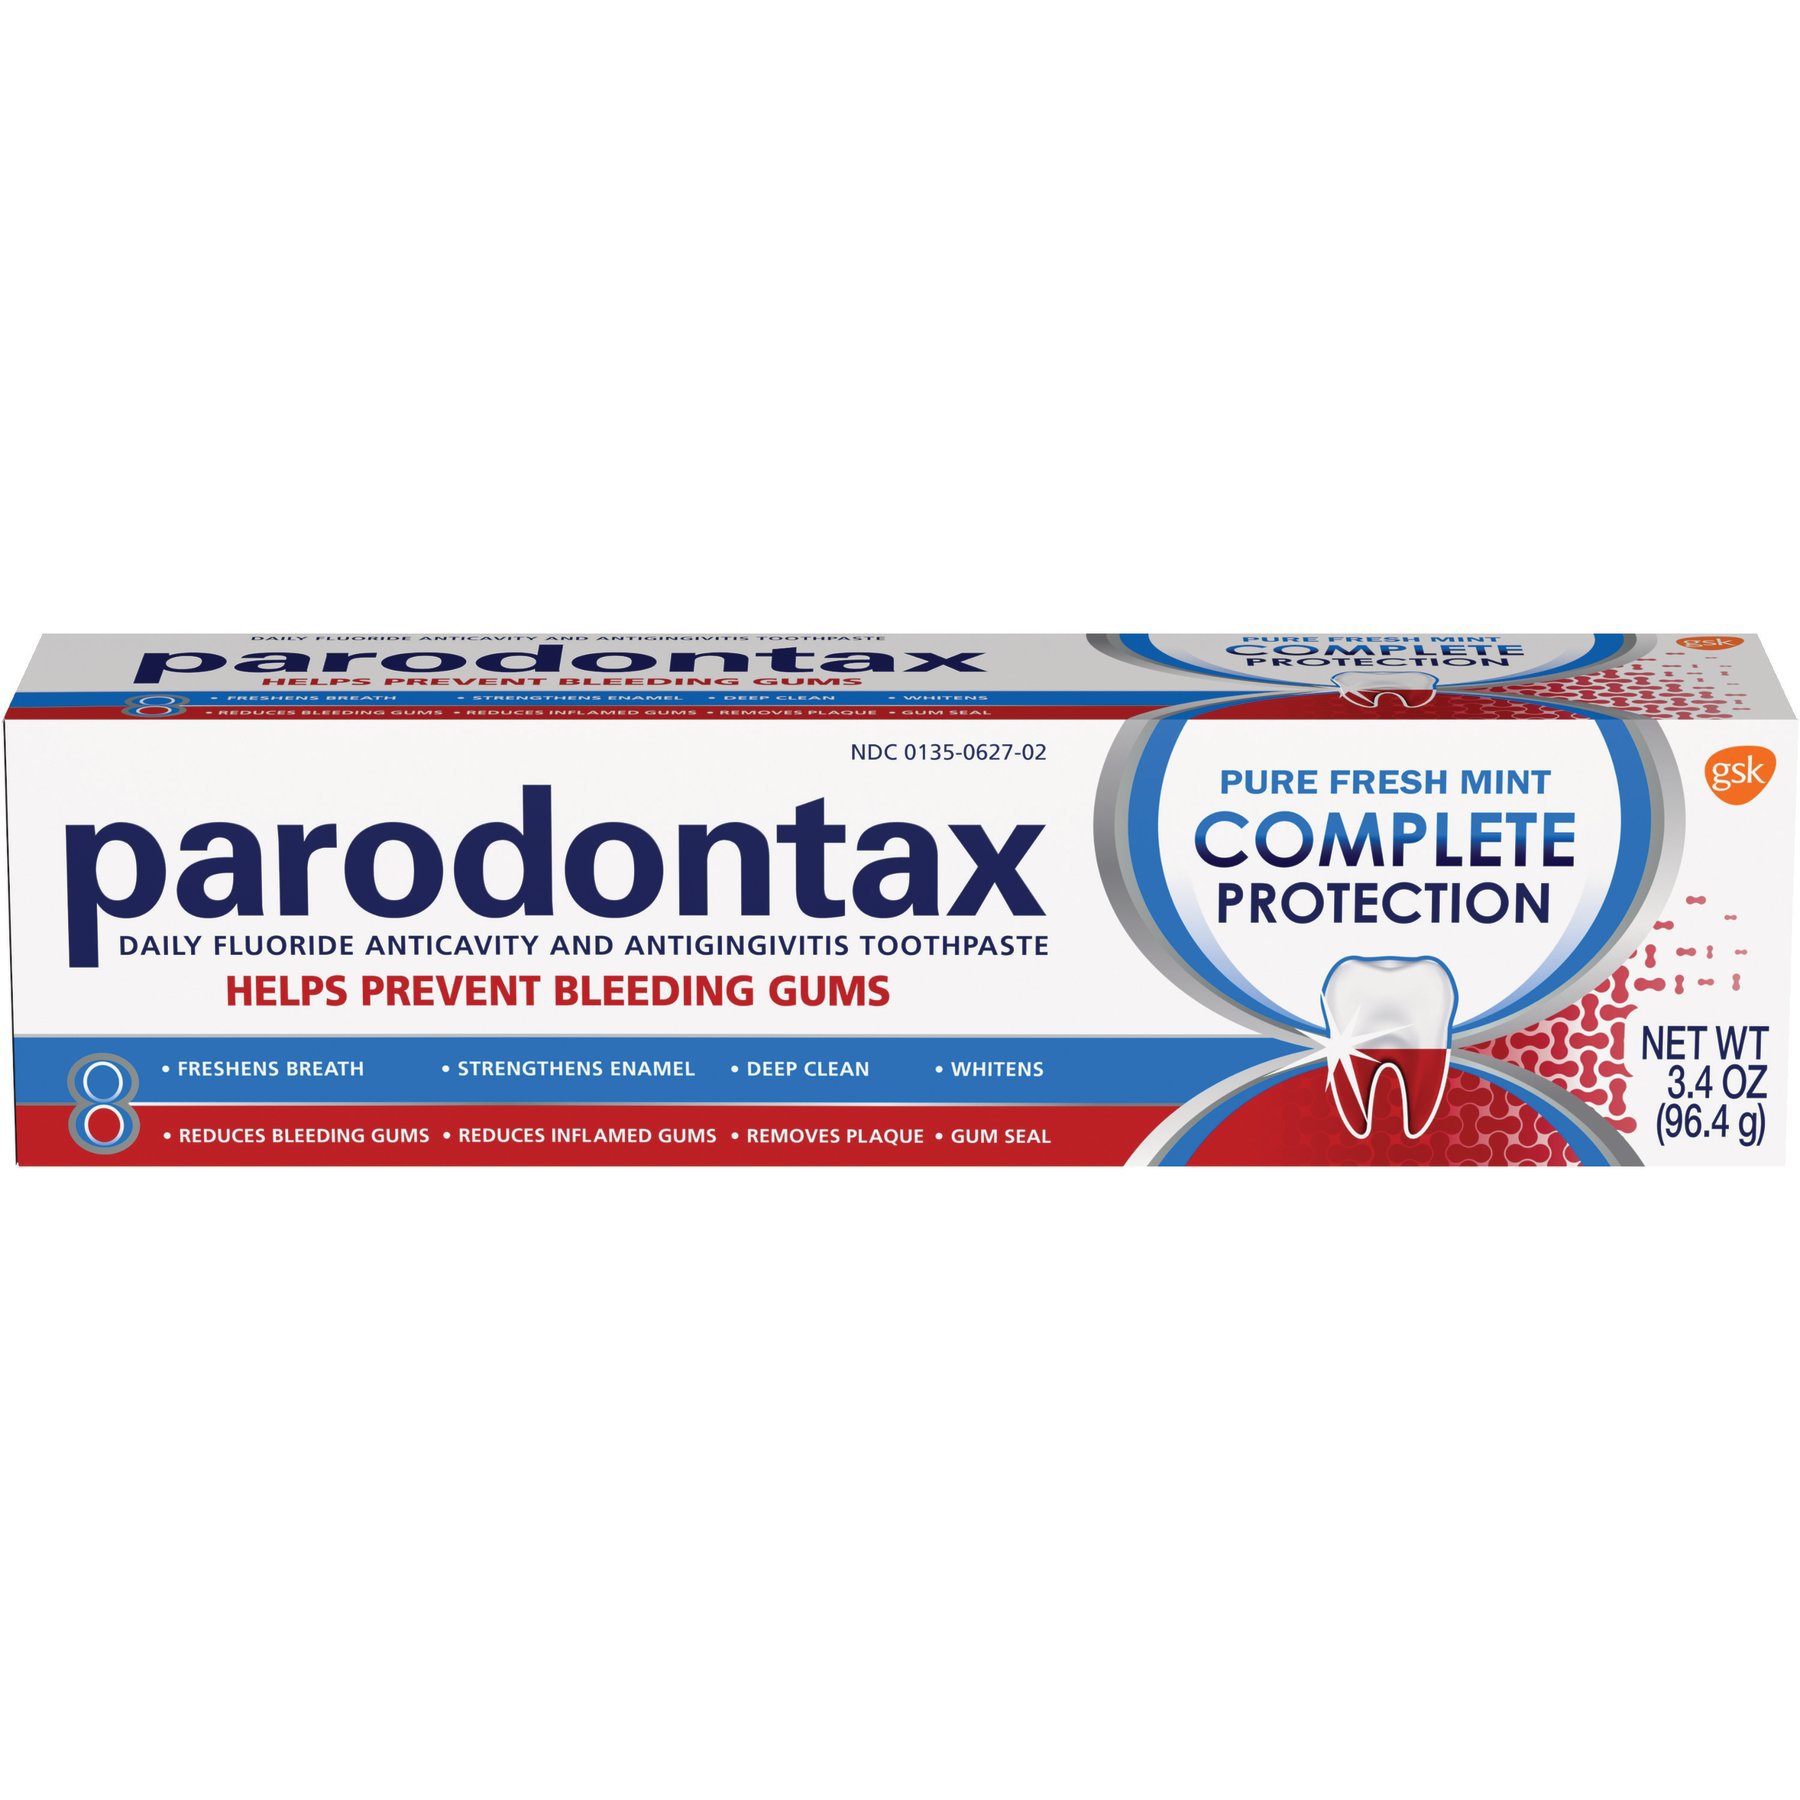 Parodontax Protection Gingivitis Toothpaste - Pure Fresh - Shop Toothpaste at H-E-B